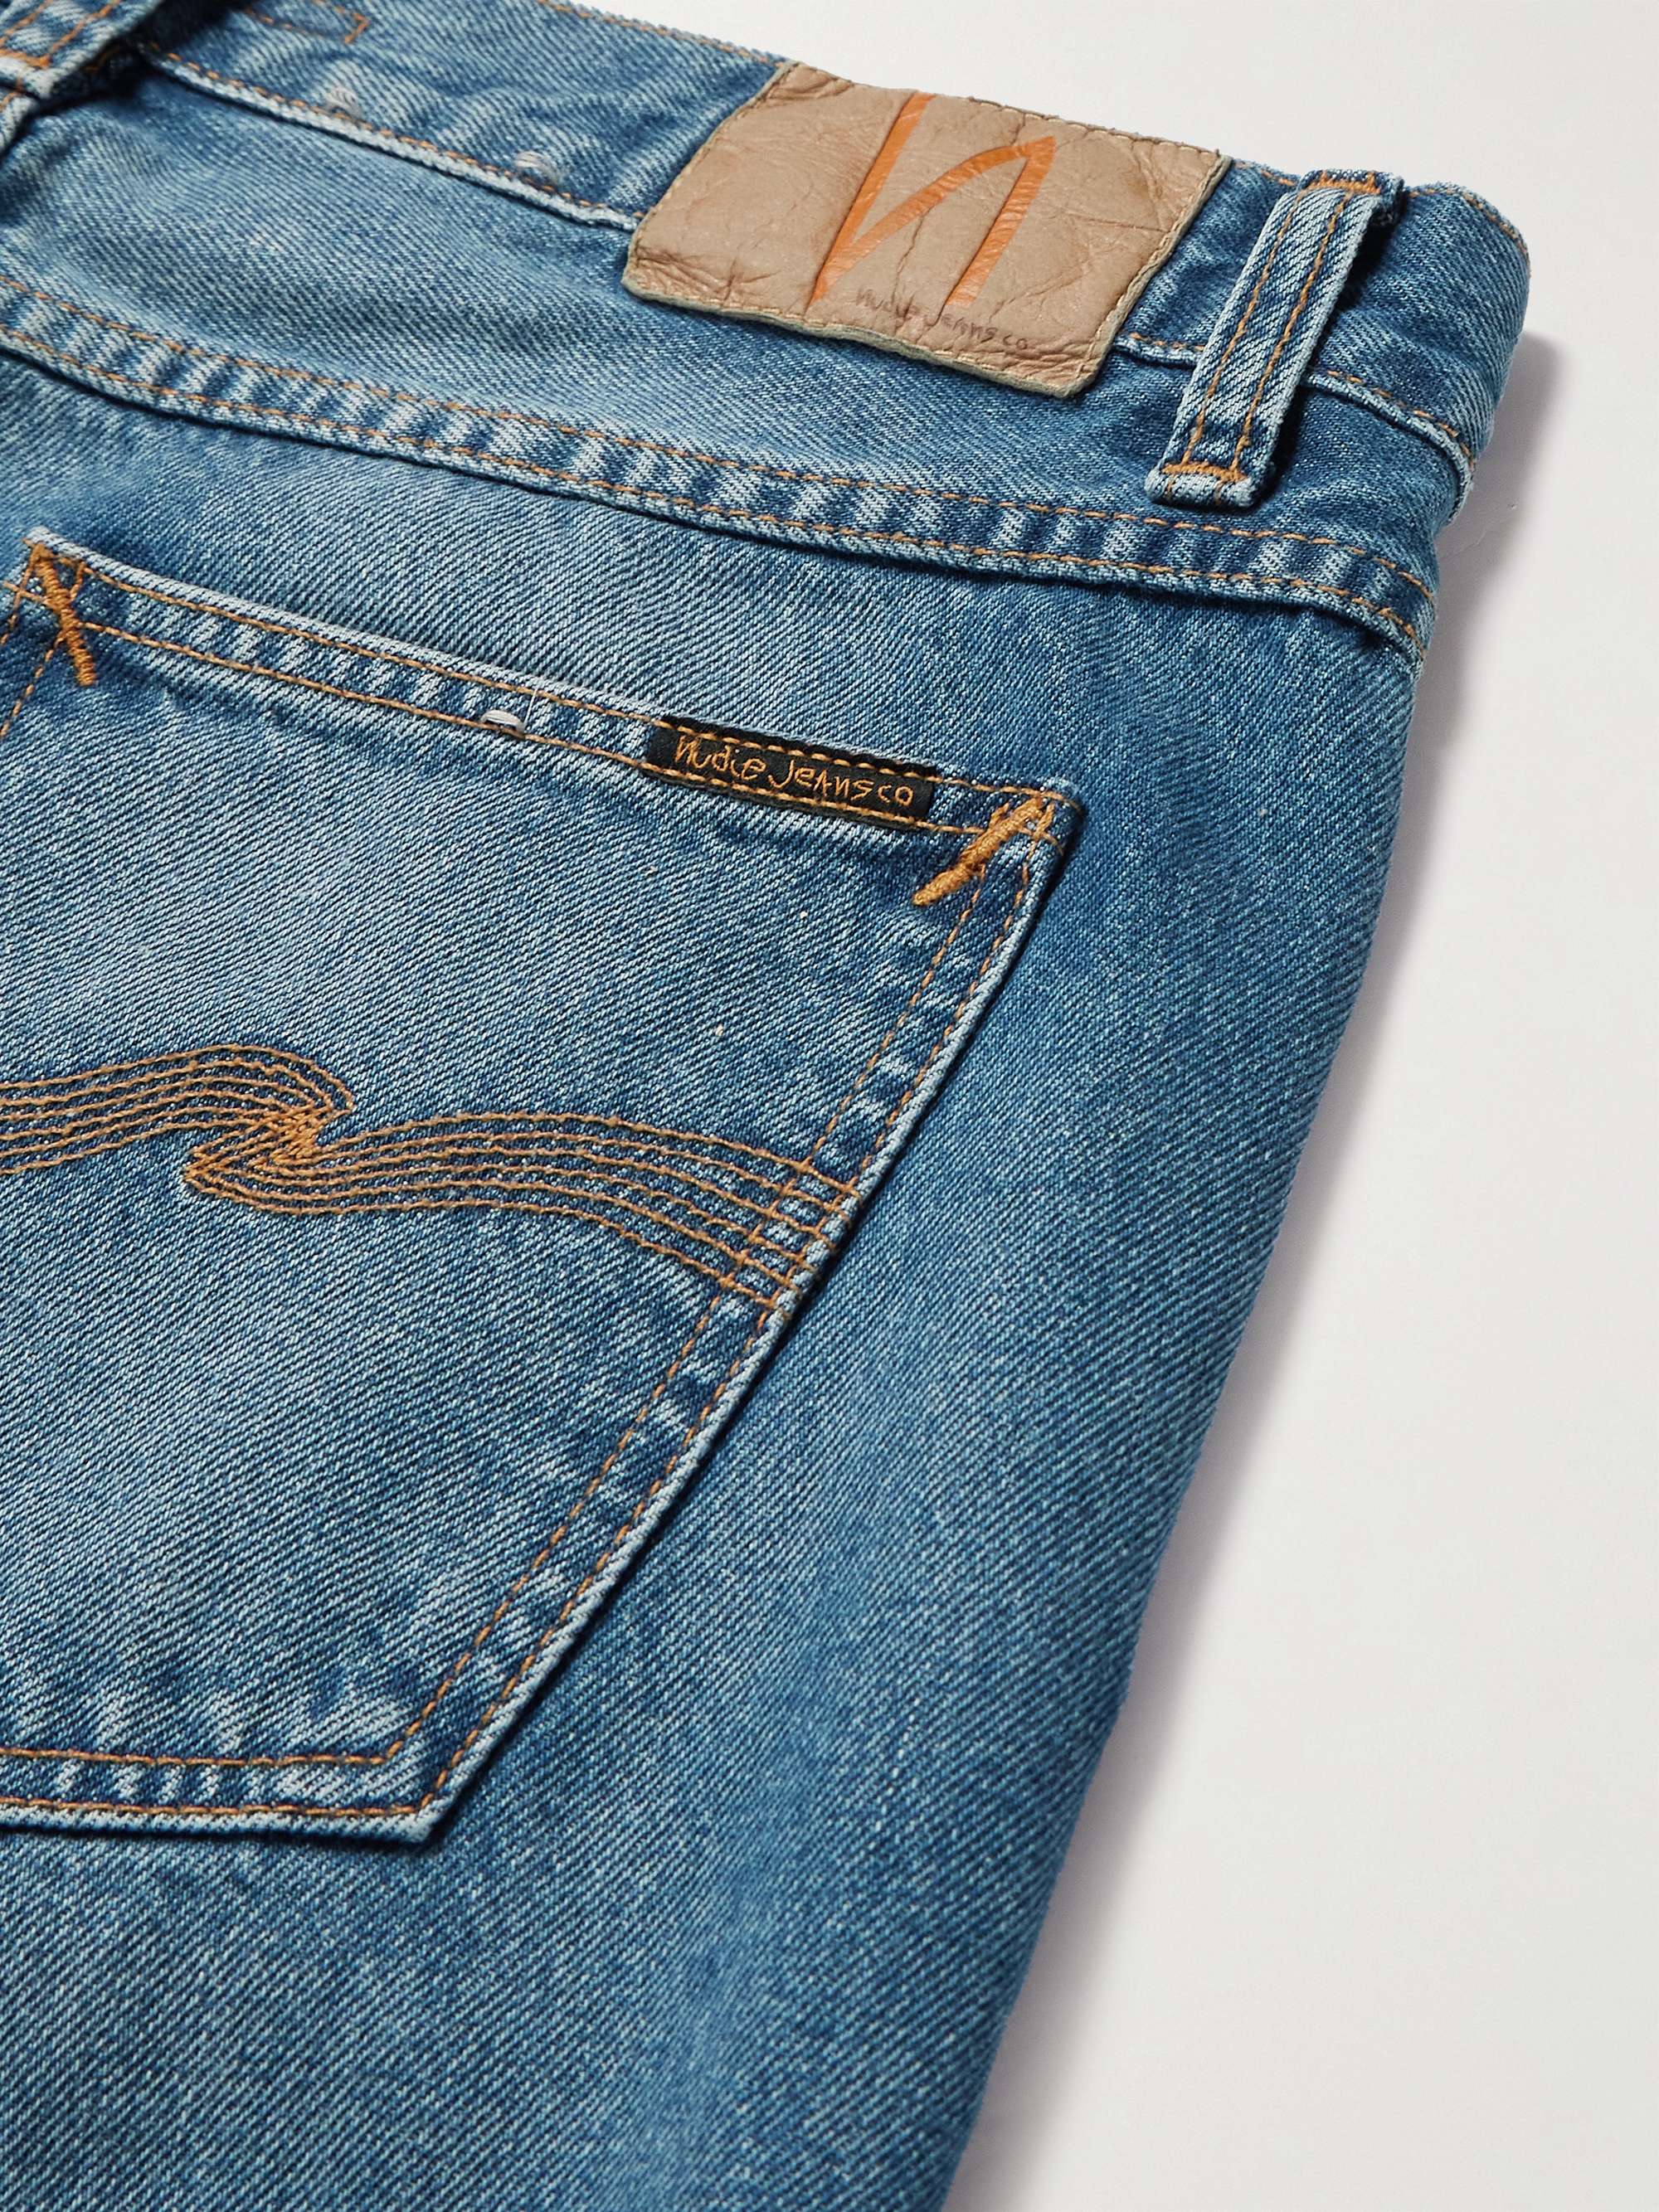 NUDIE JEANS Gritty Jackson Slim-Fit Jeans for Men | MR PORTER